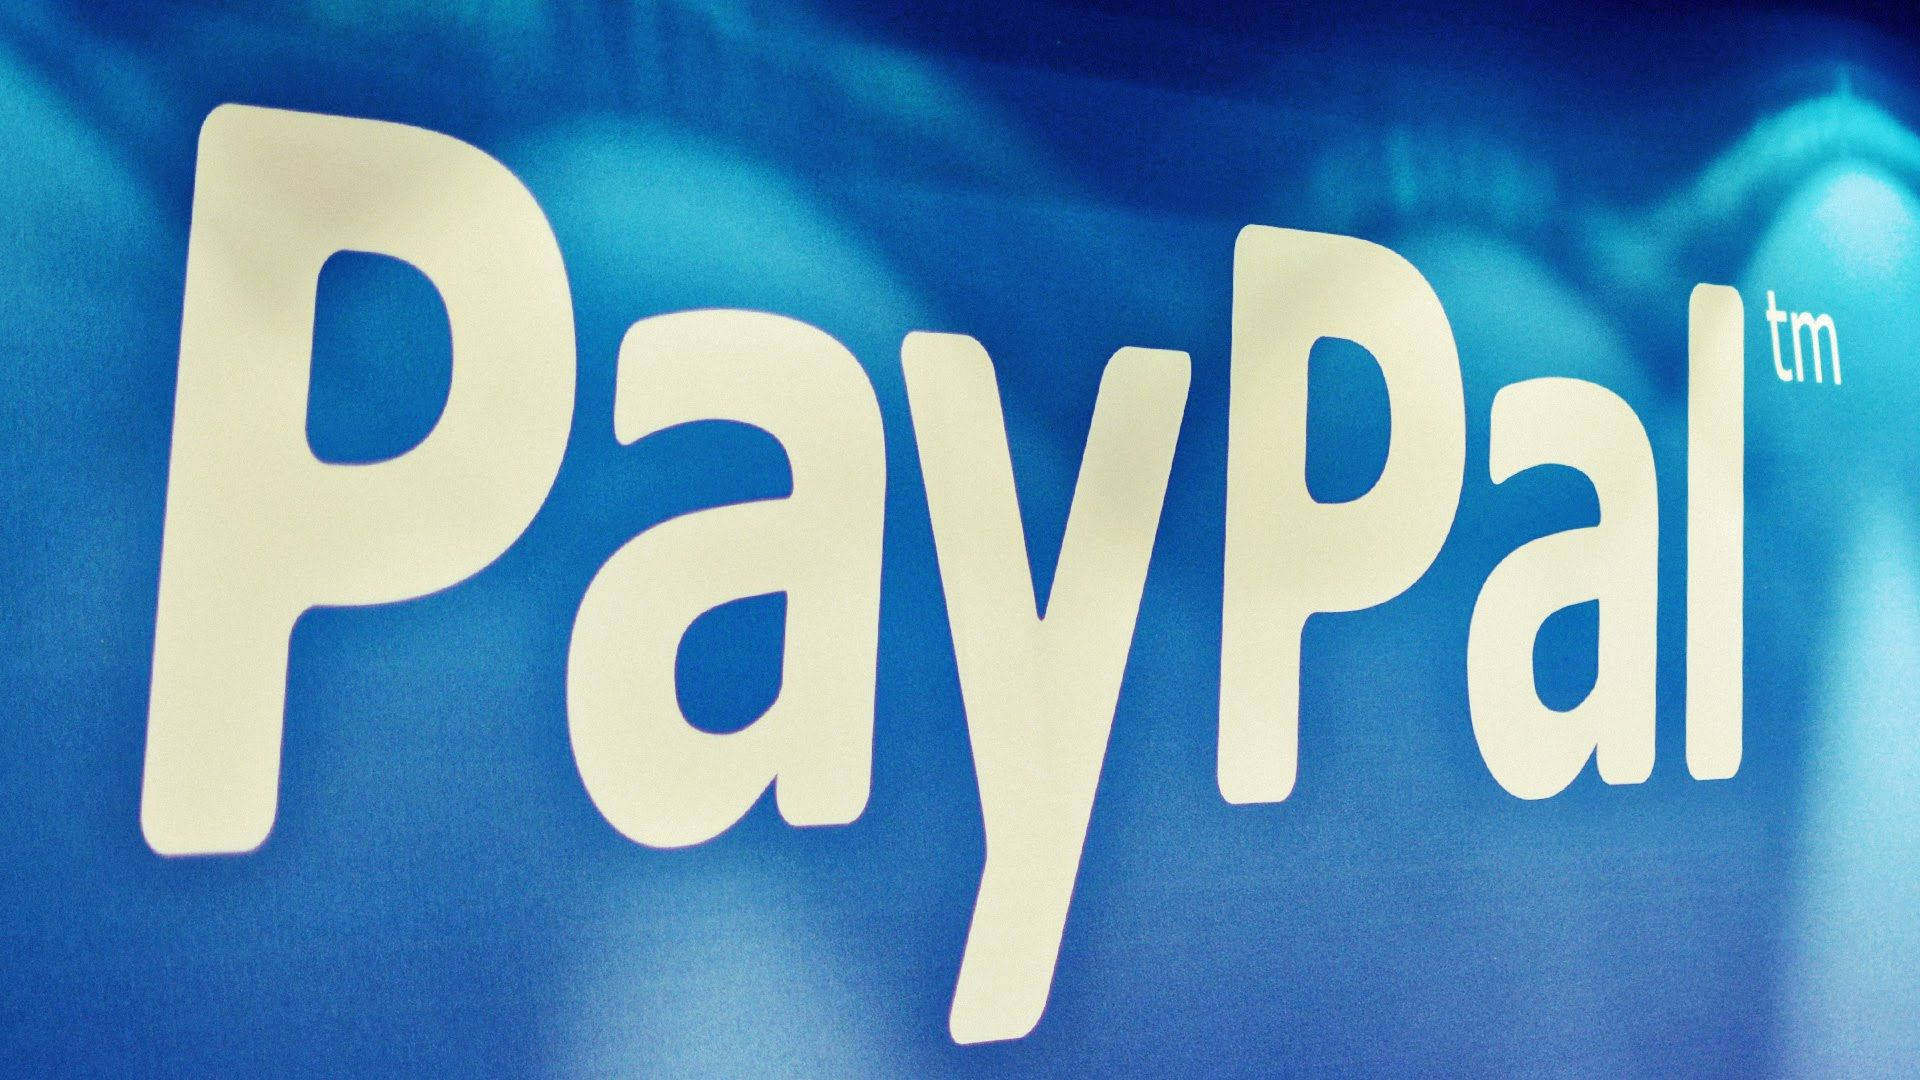 Paypal Brand With Glossy Lights Wallpaper